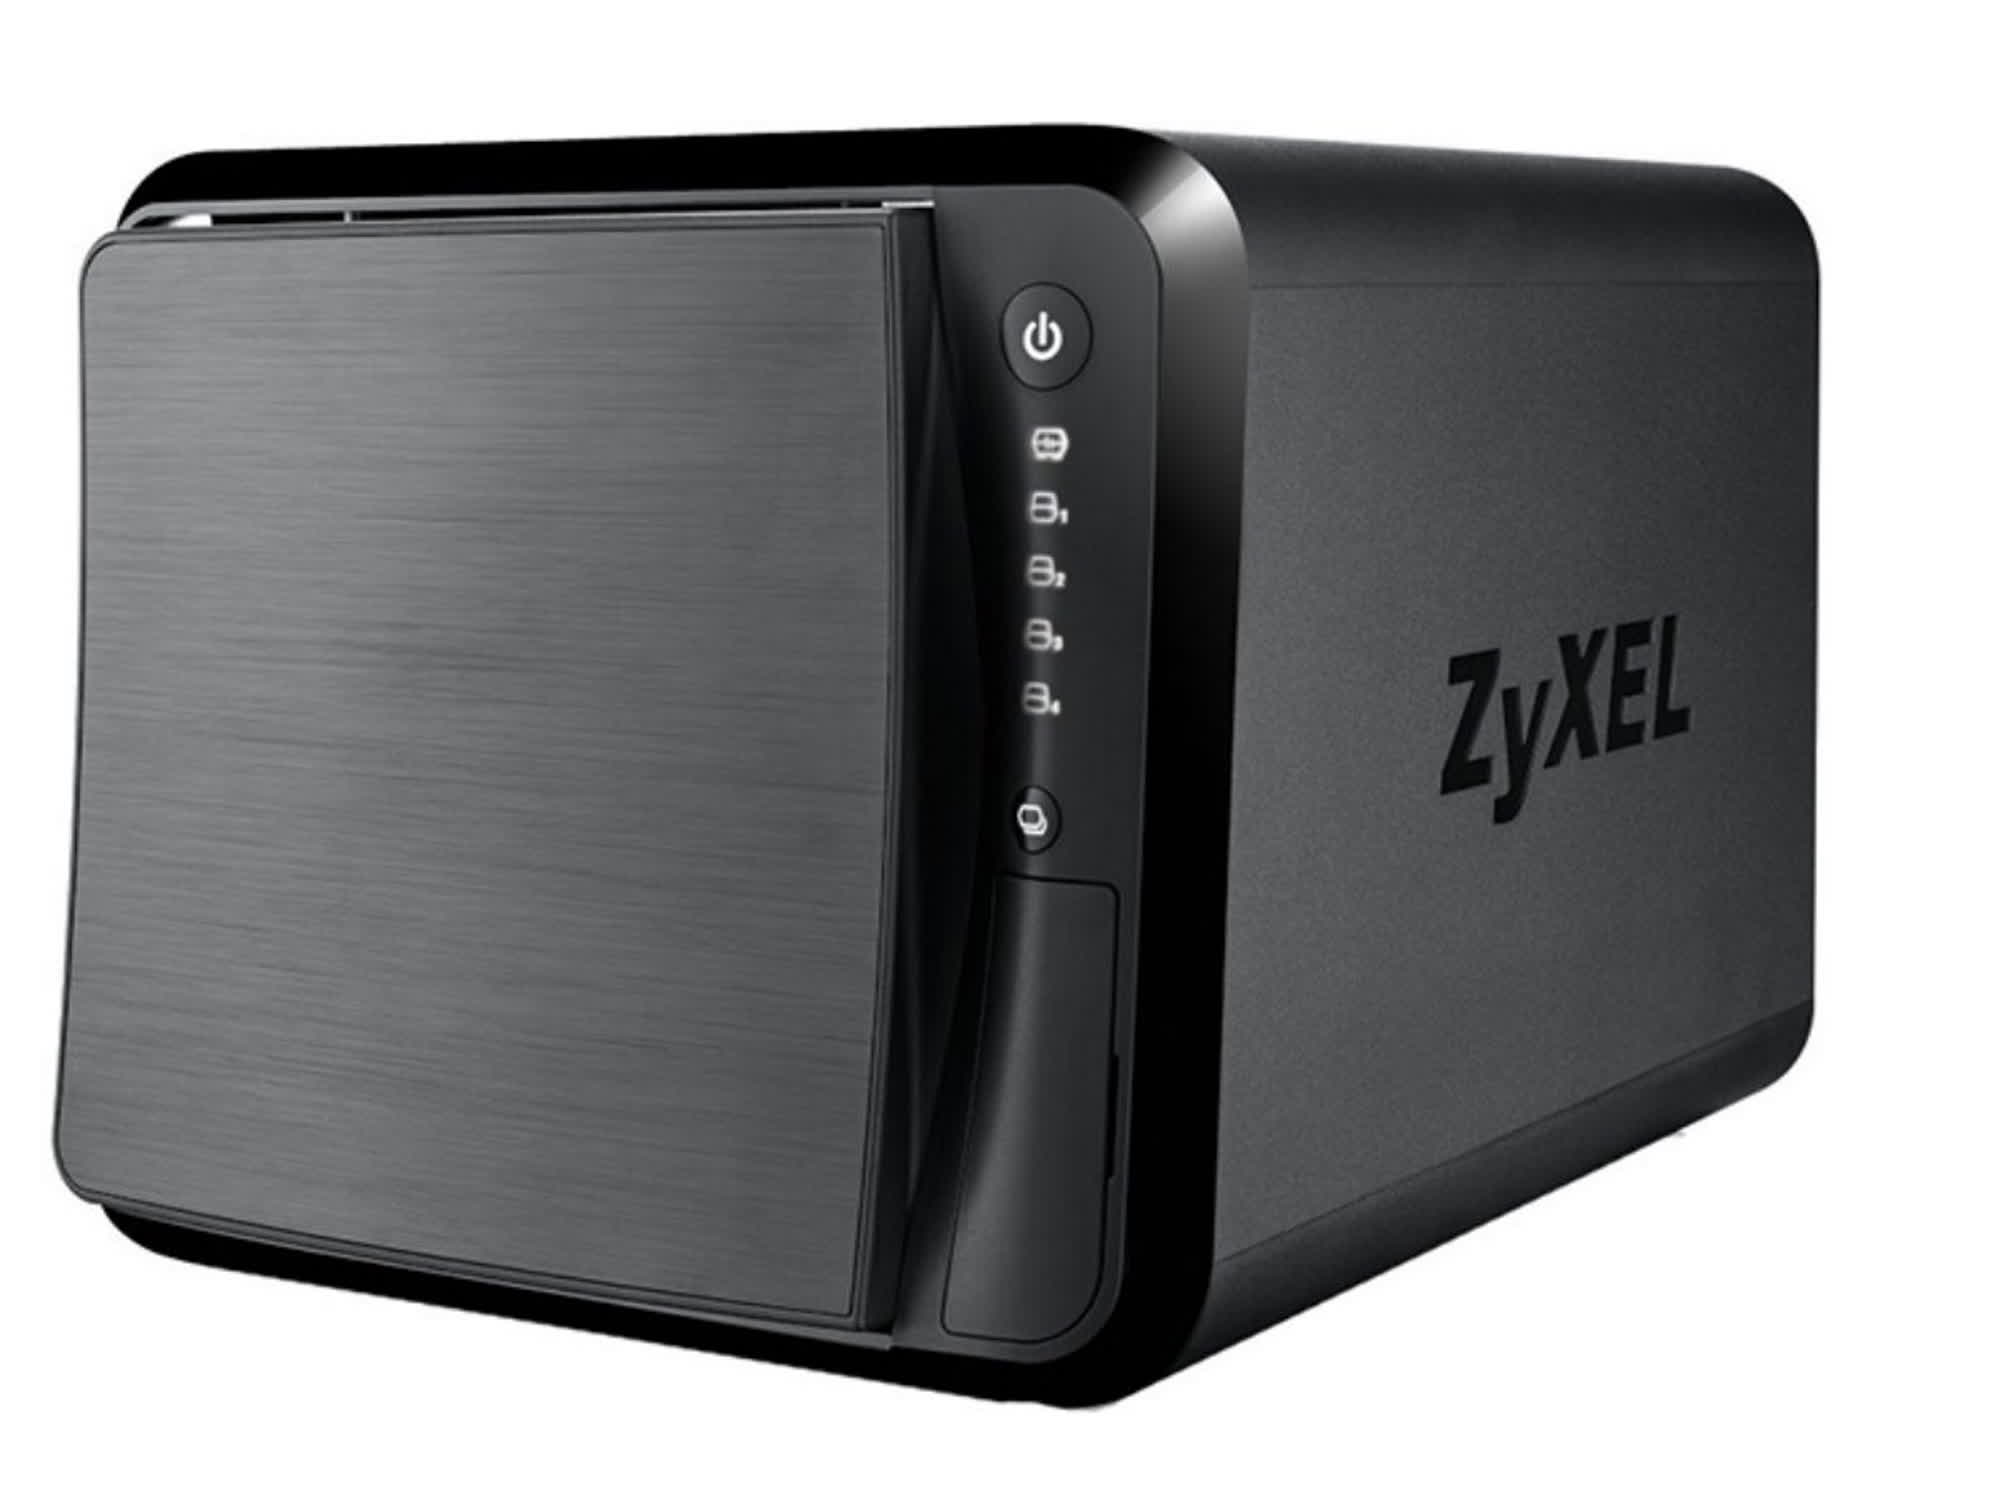 Zyxel warns about new critical vulnerabilities found in its NAS devices